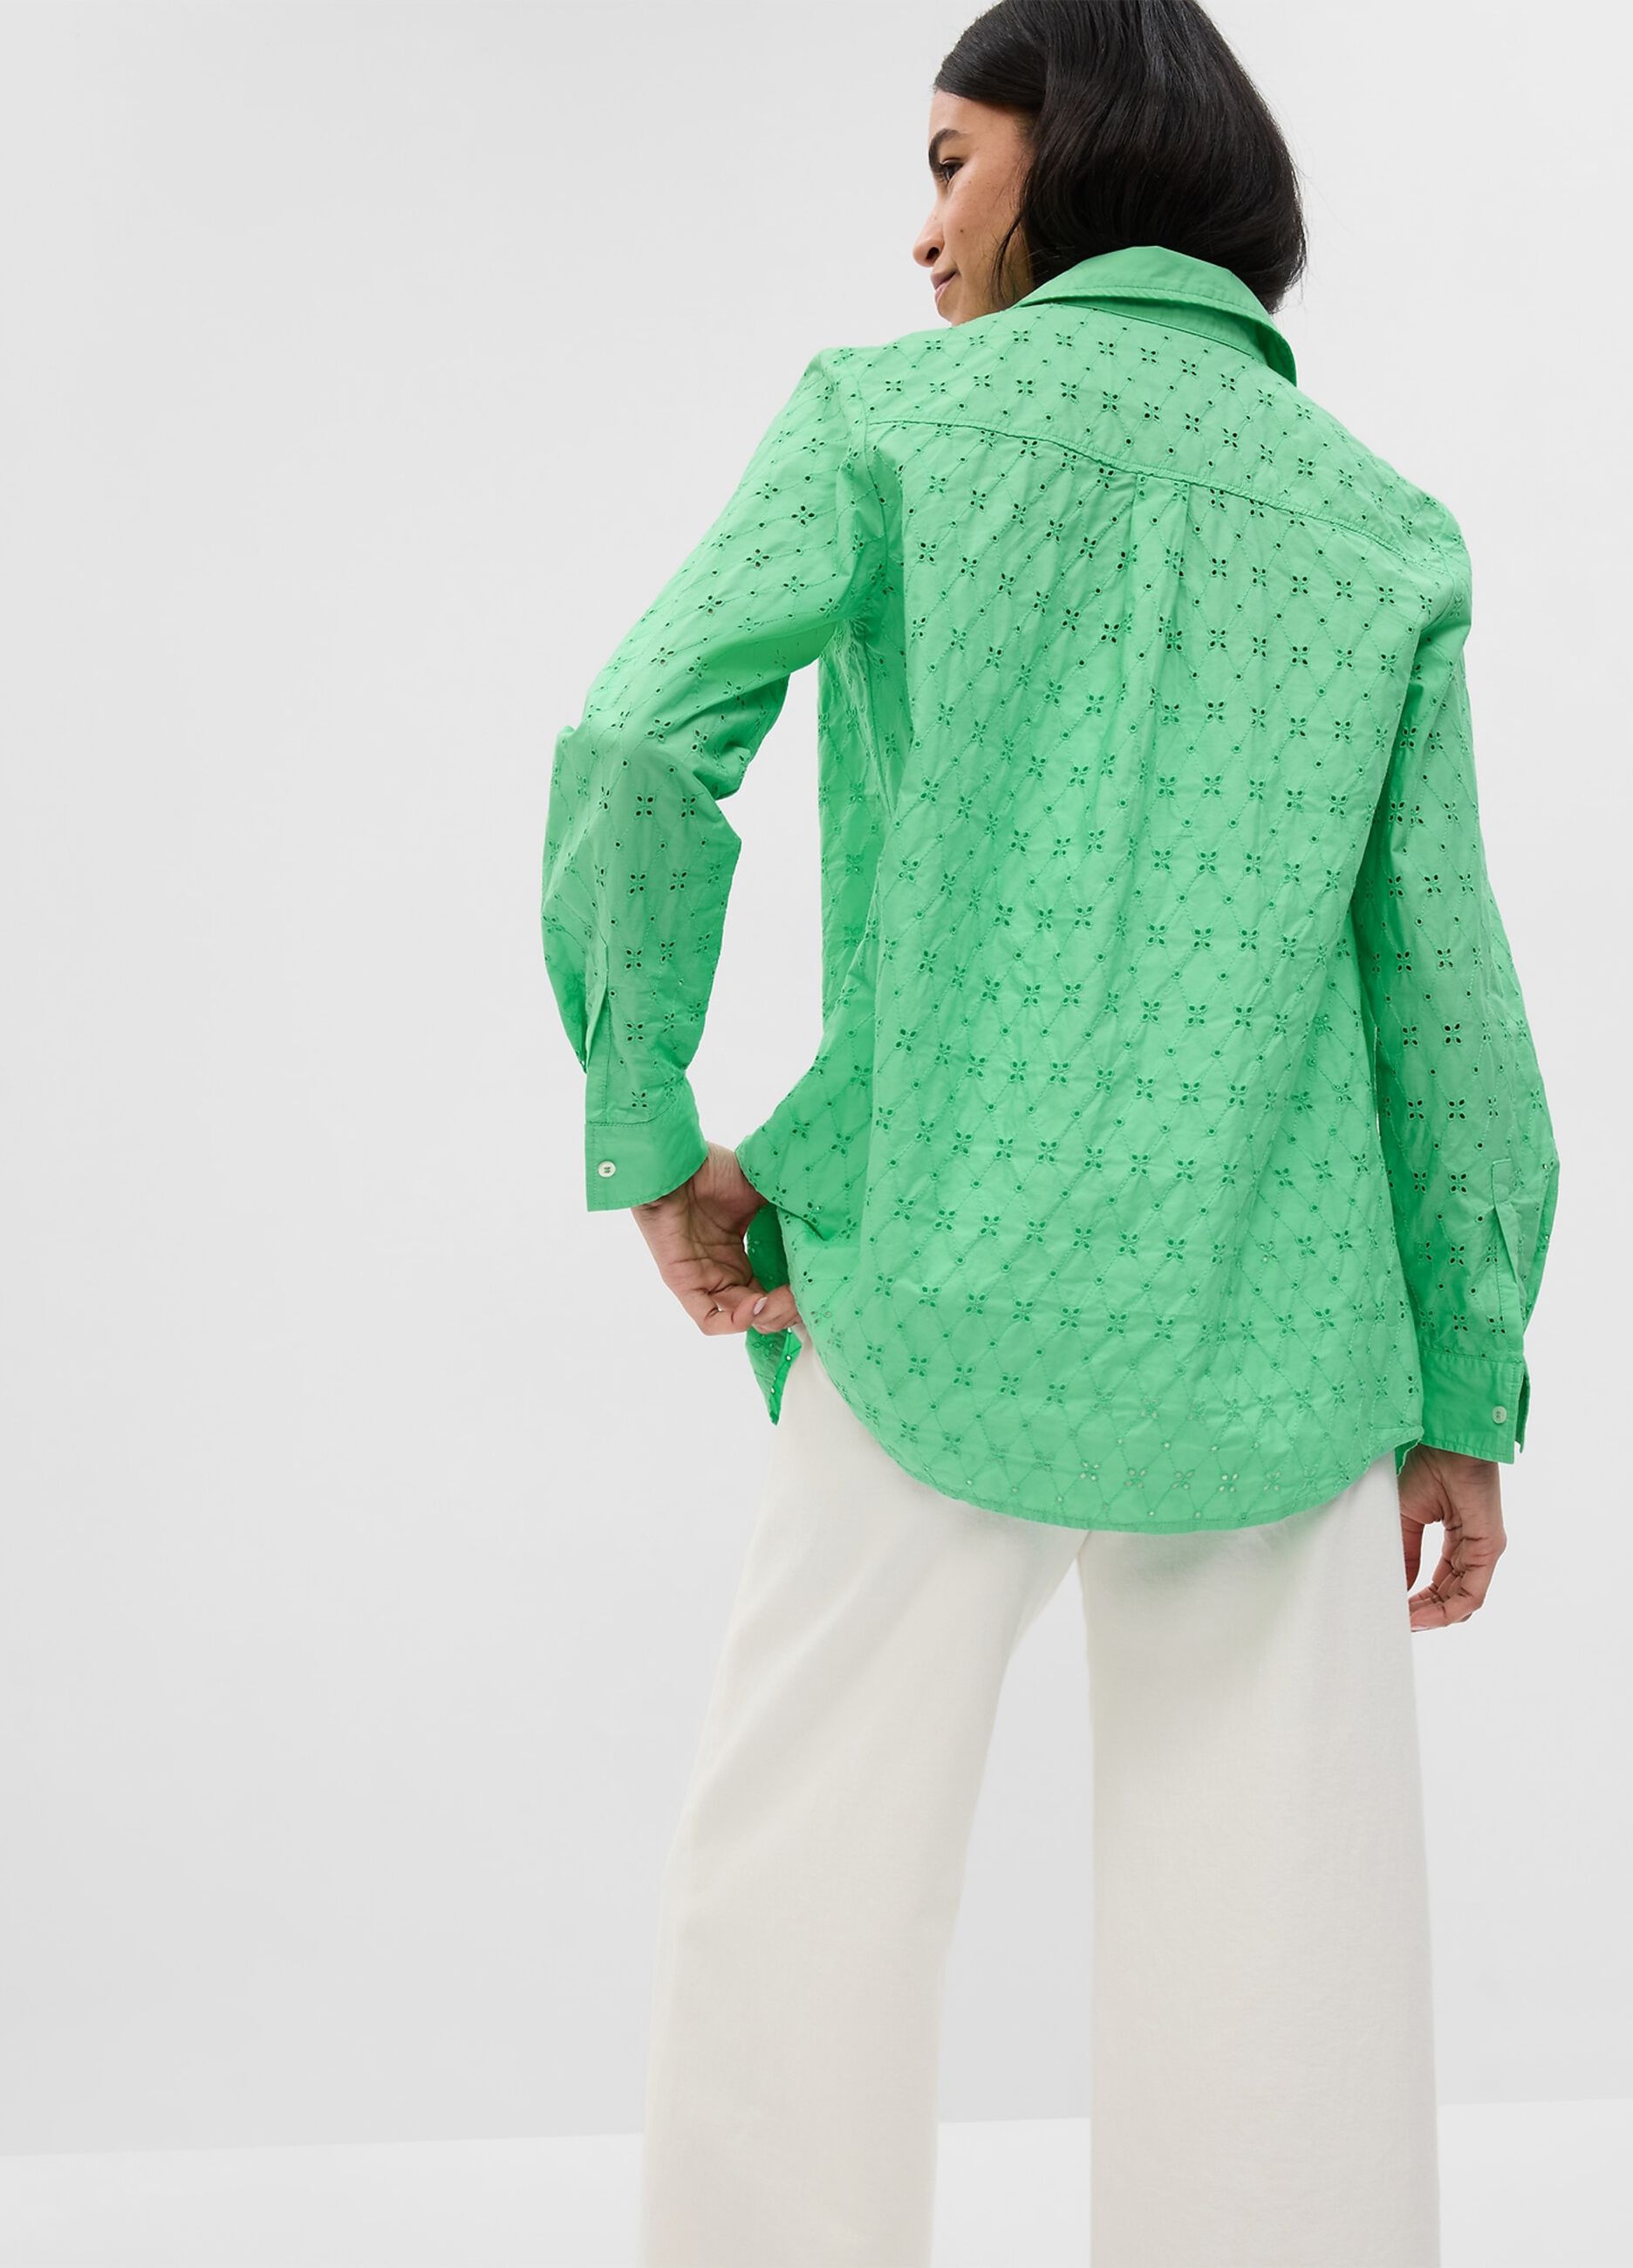 Broderie anglaise lace shirt_1